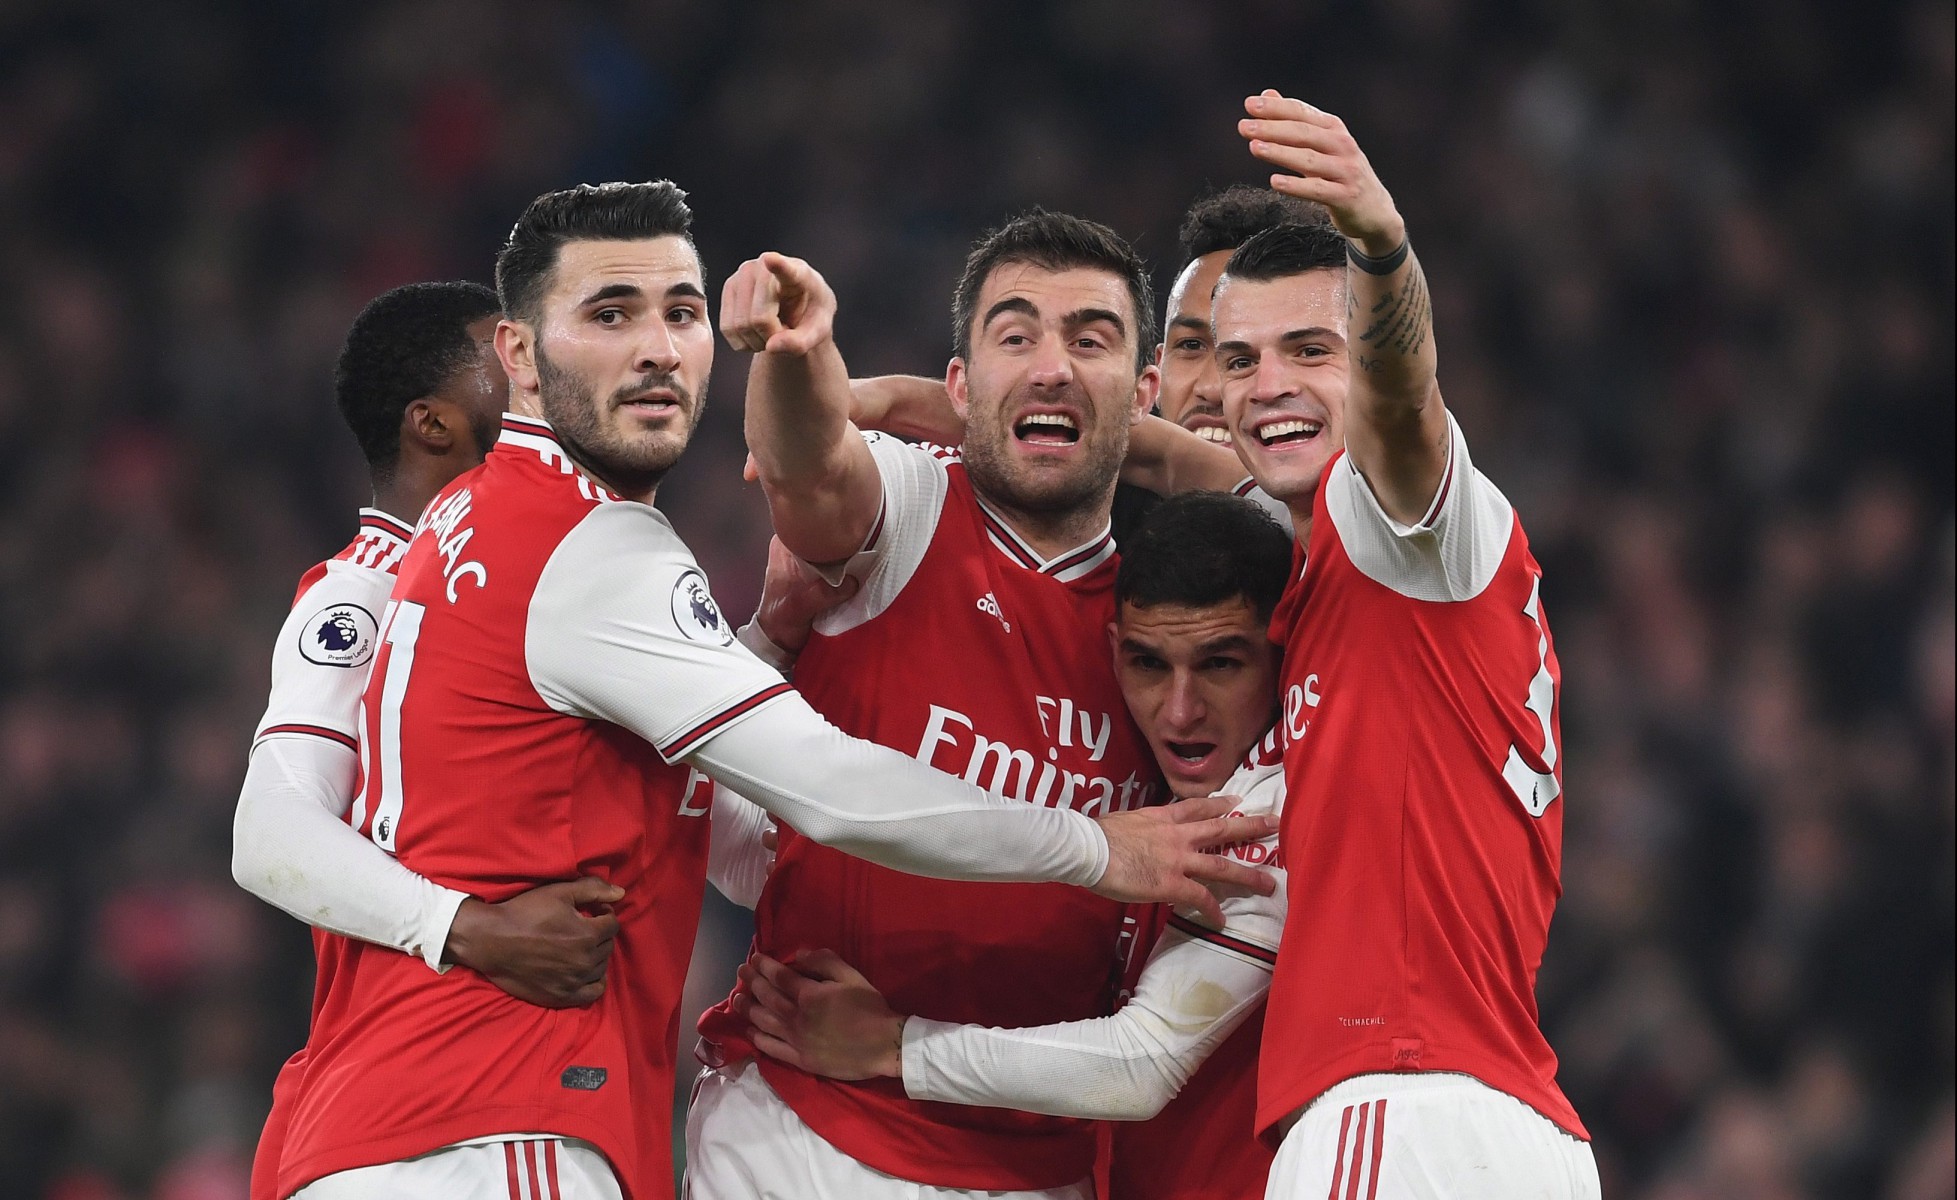 Arsenal vs Leeds FREE: Live stream, TV channel, kick-off time and team